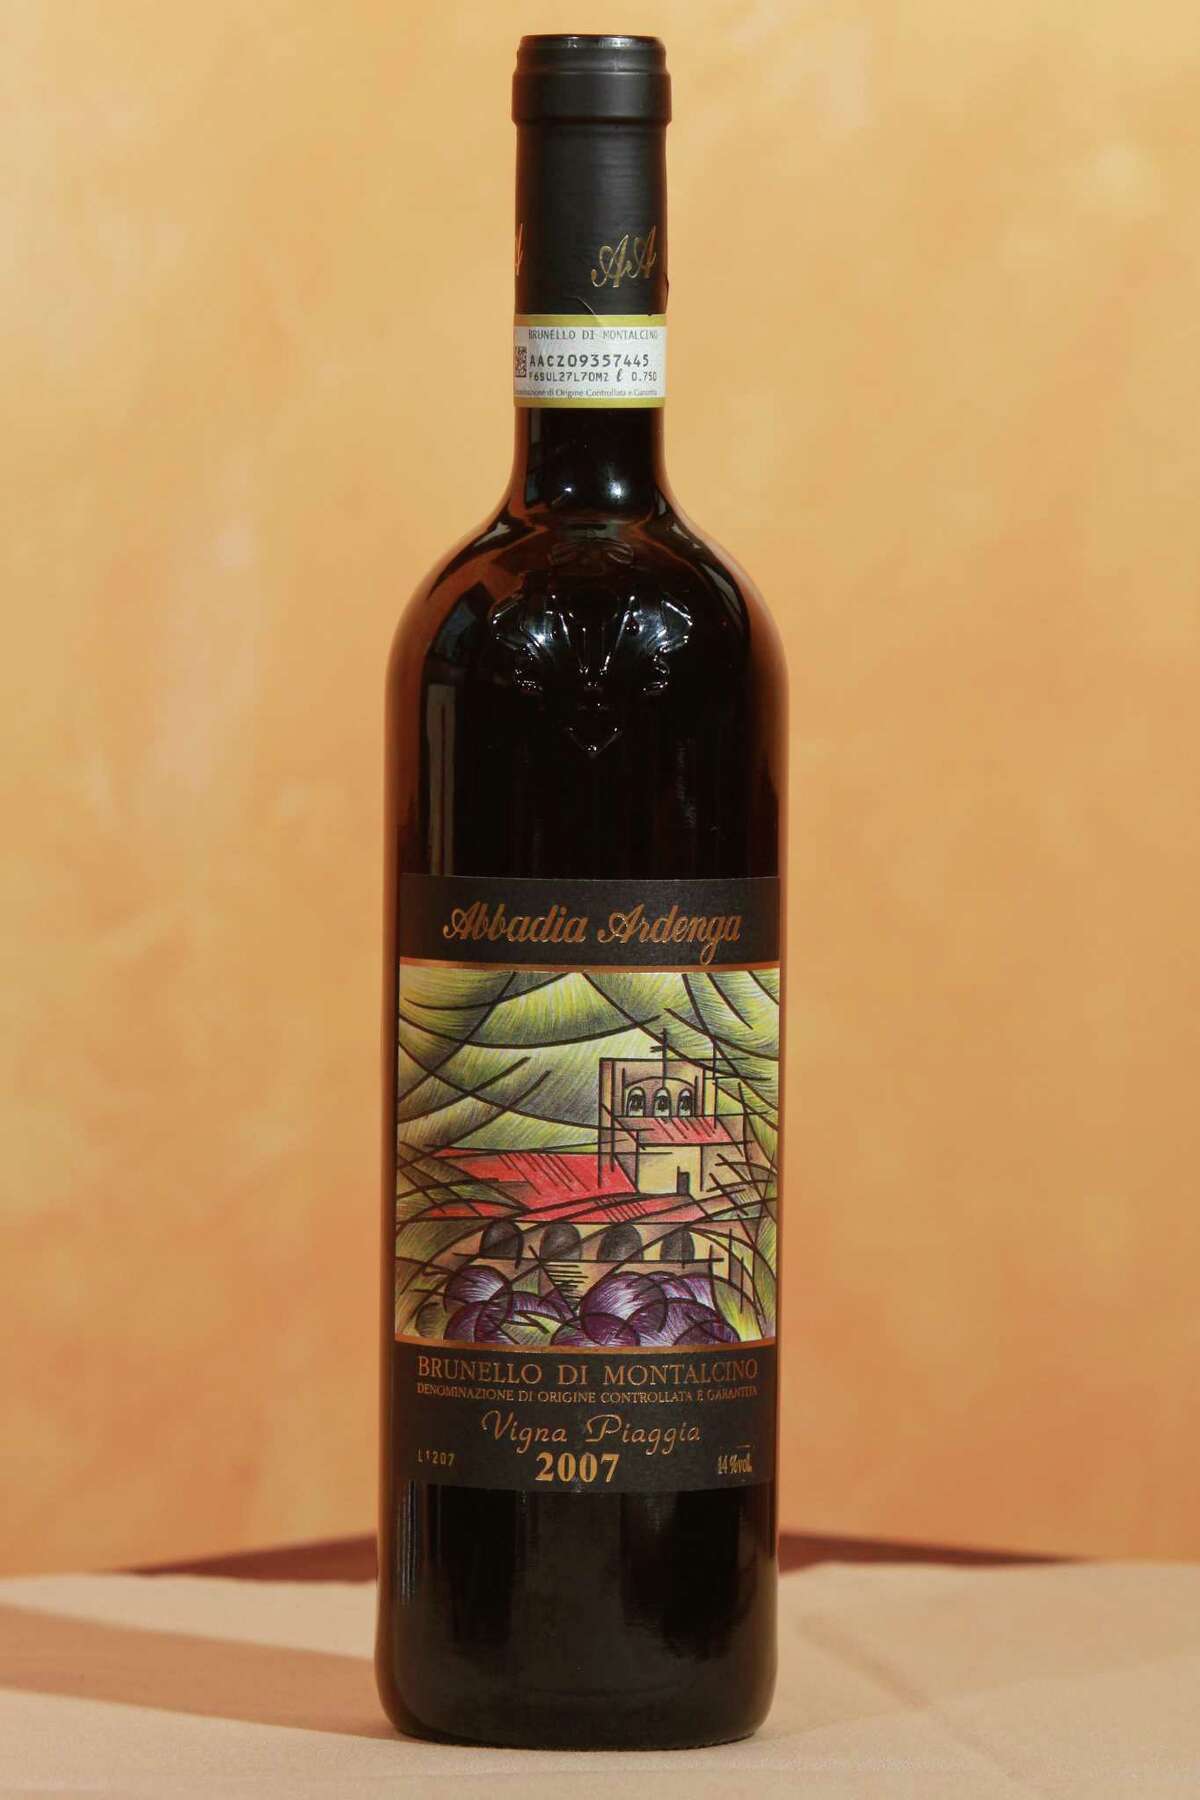 (For the Chronicle/Gary Fountain, May 15, 2014) Abbadia Ardenga Brunello Di Montalcino Vigna Piaggia 2007, the wine of choice for Eduardo Ferre, general manager and co-owner of Luigi's Cucina Italiana.